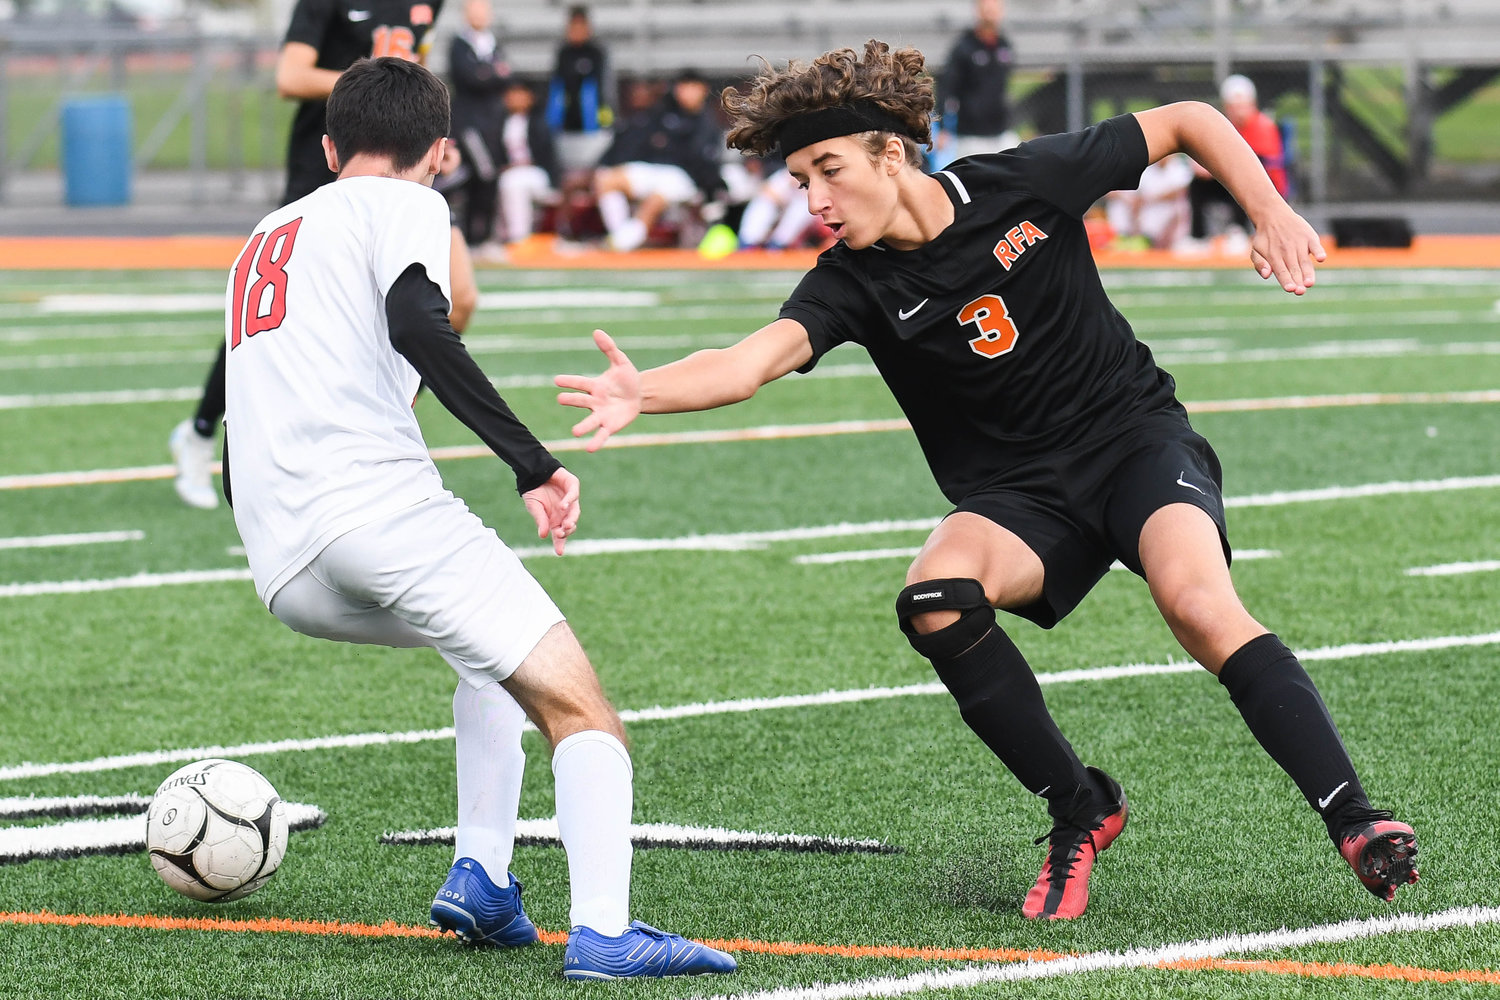 Rome Free Academy’s Noah Artigiani, right, defends Proctor’s Alan Catic during the game on Tuesday at RFA Stadium. Proctor scored once in the first half and three times in the second to get a 4-0 win. Four players had a goal for Proctor.